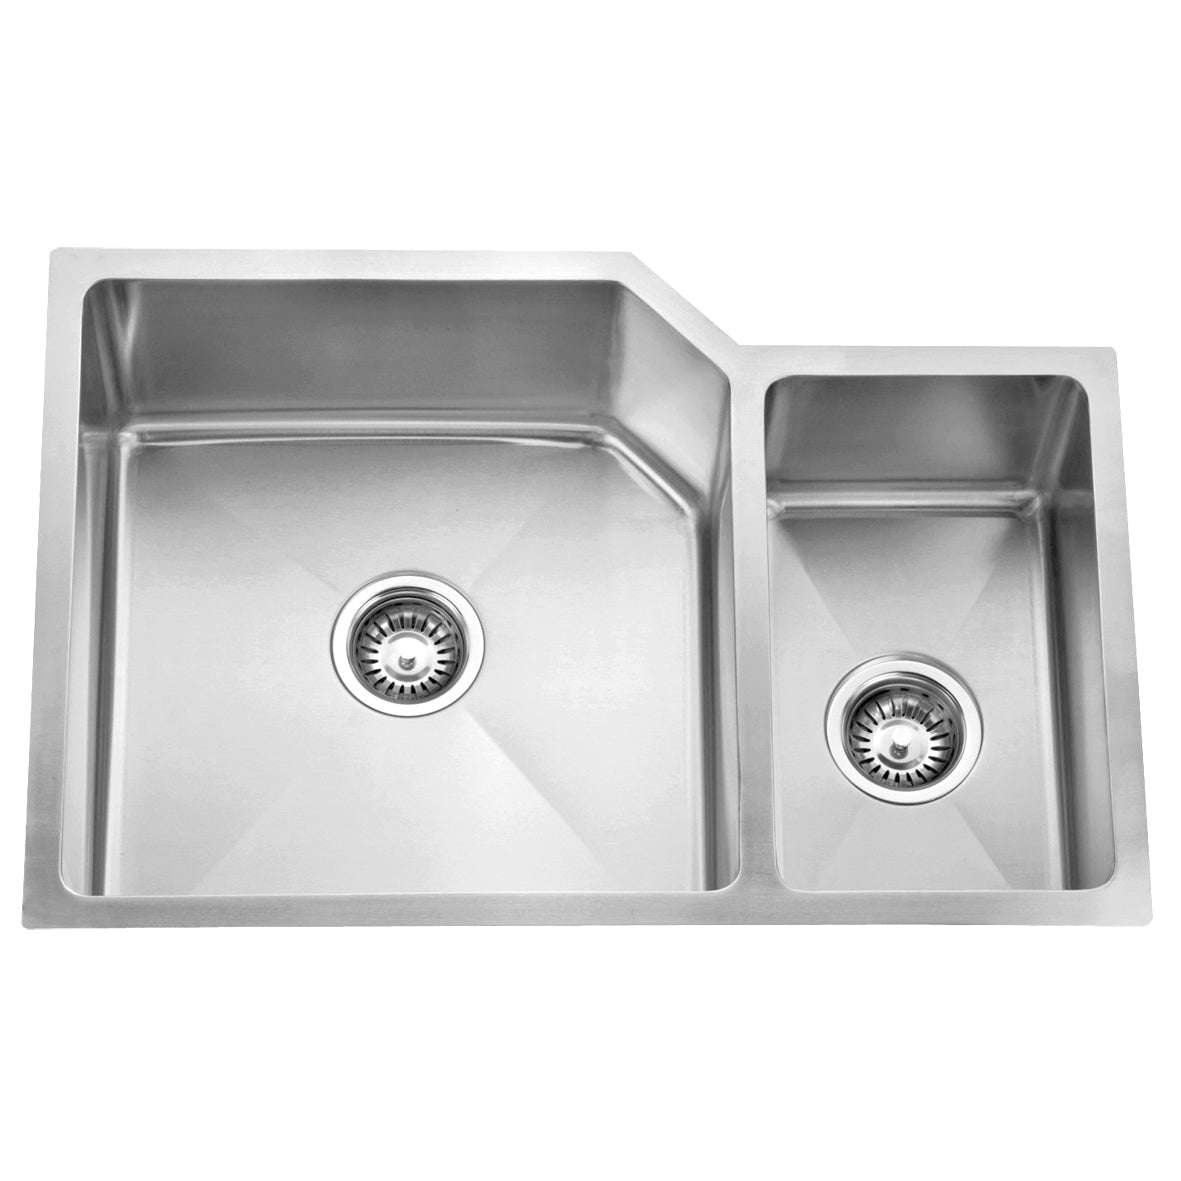 DAX Handmade 70/30 Double Bowl Undermount Kitchen Sink, 16 Gauge Stainless Steel, Brushed Finish, 30 x 18 x 9 Inches (DAX-3020B)